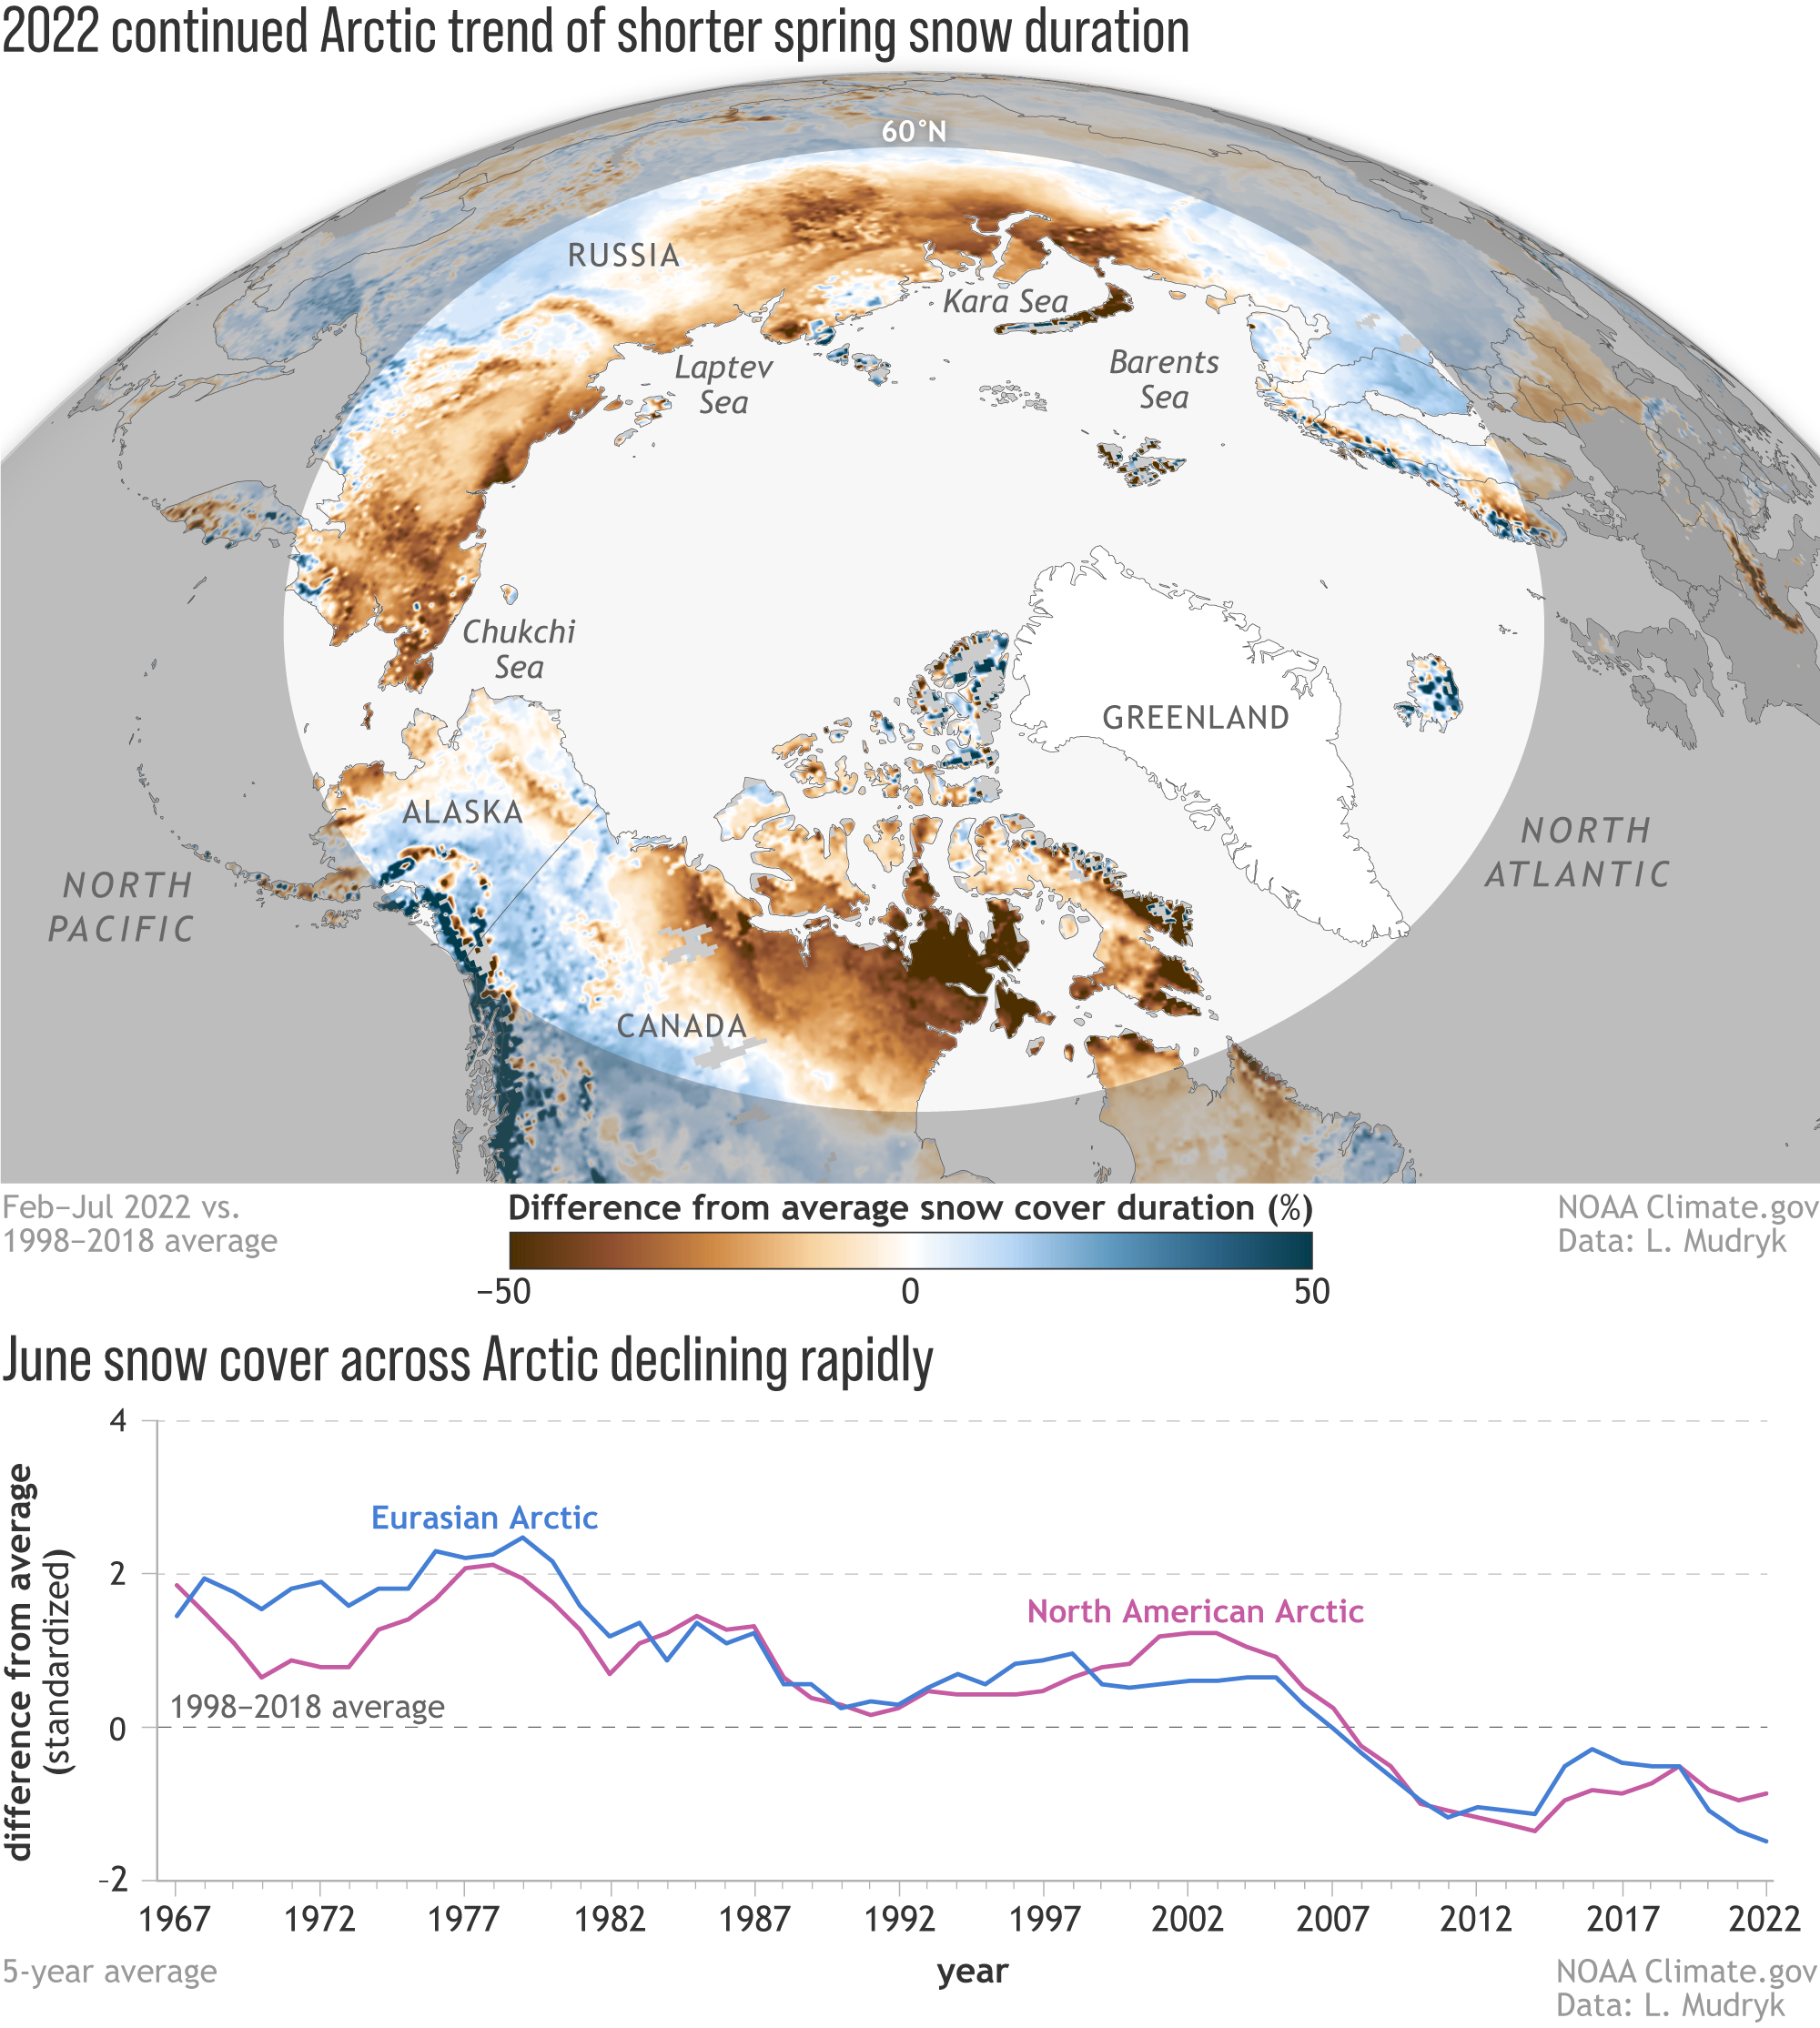 Early snowmelt across Arctic in 2022 continues long-term pattern